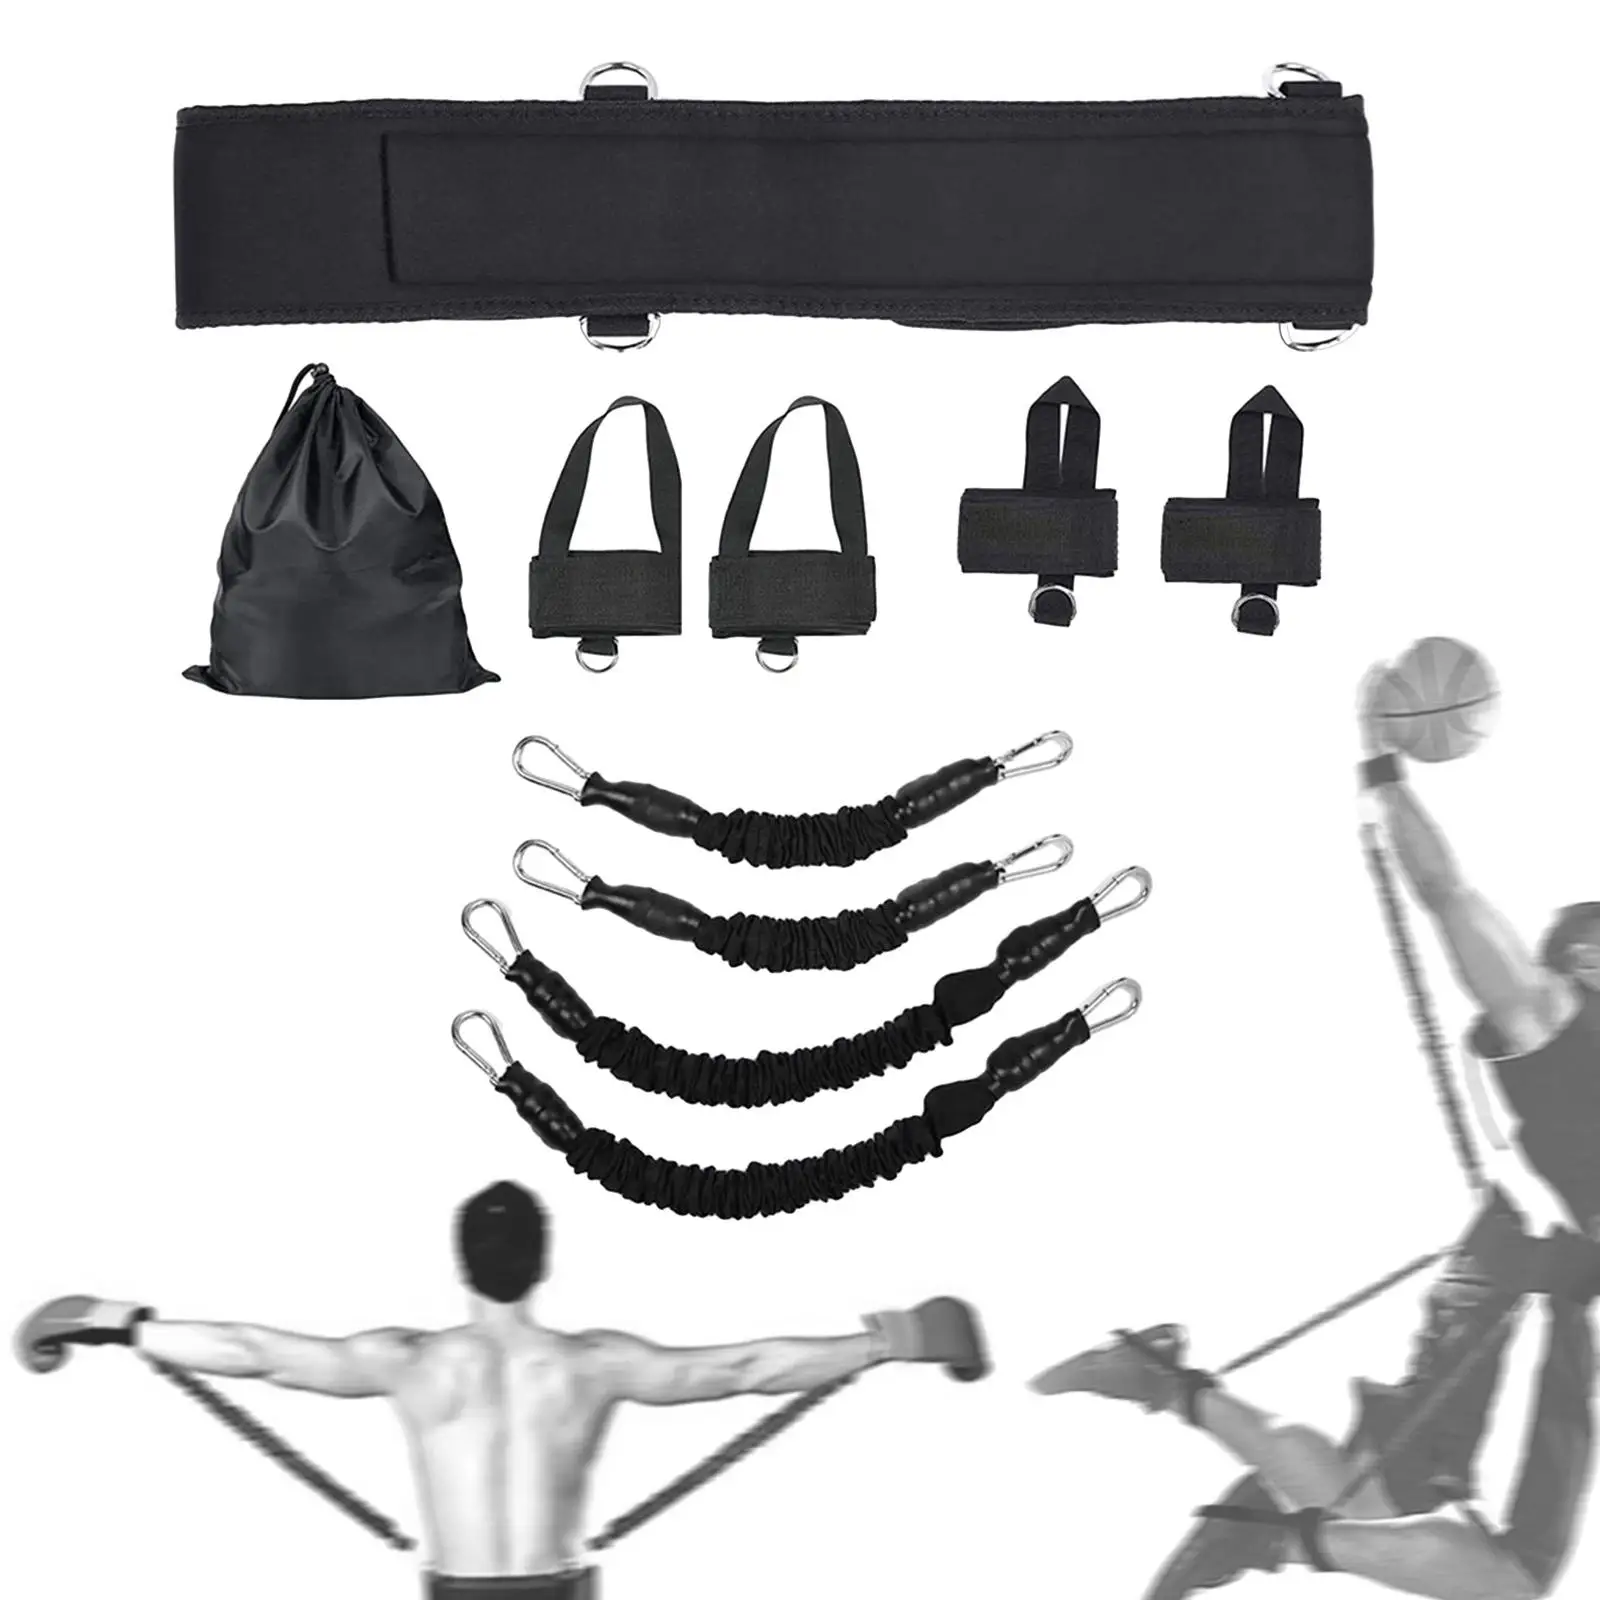 Boxing Resistance Bands 140lbs Bounce Trainer for Resistance Training at Home Enhance Explosive Power Speed Agility Basketball